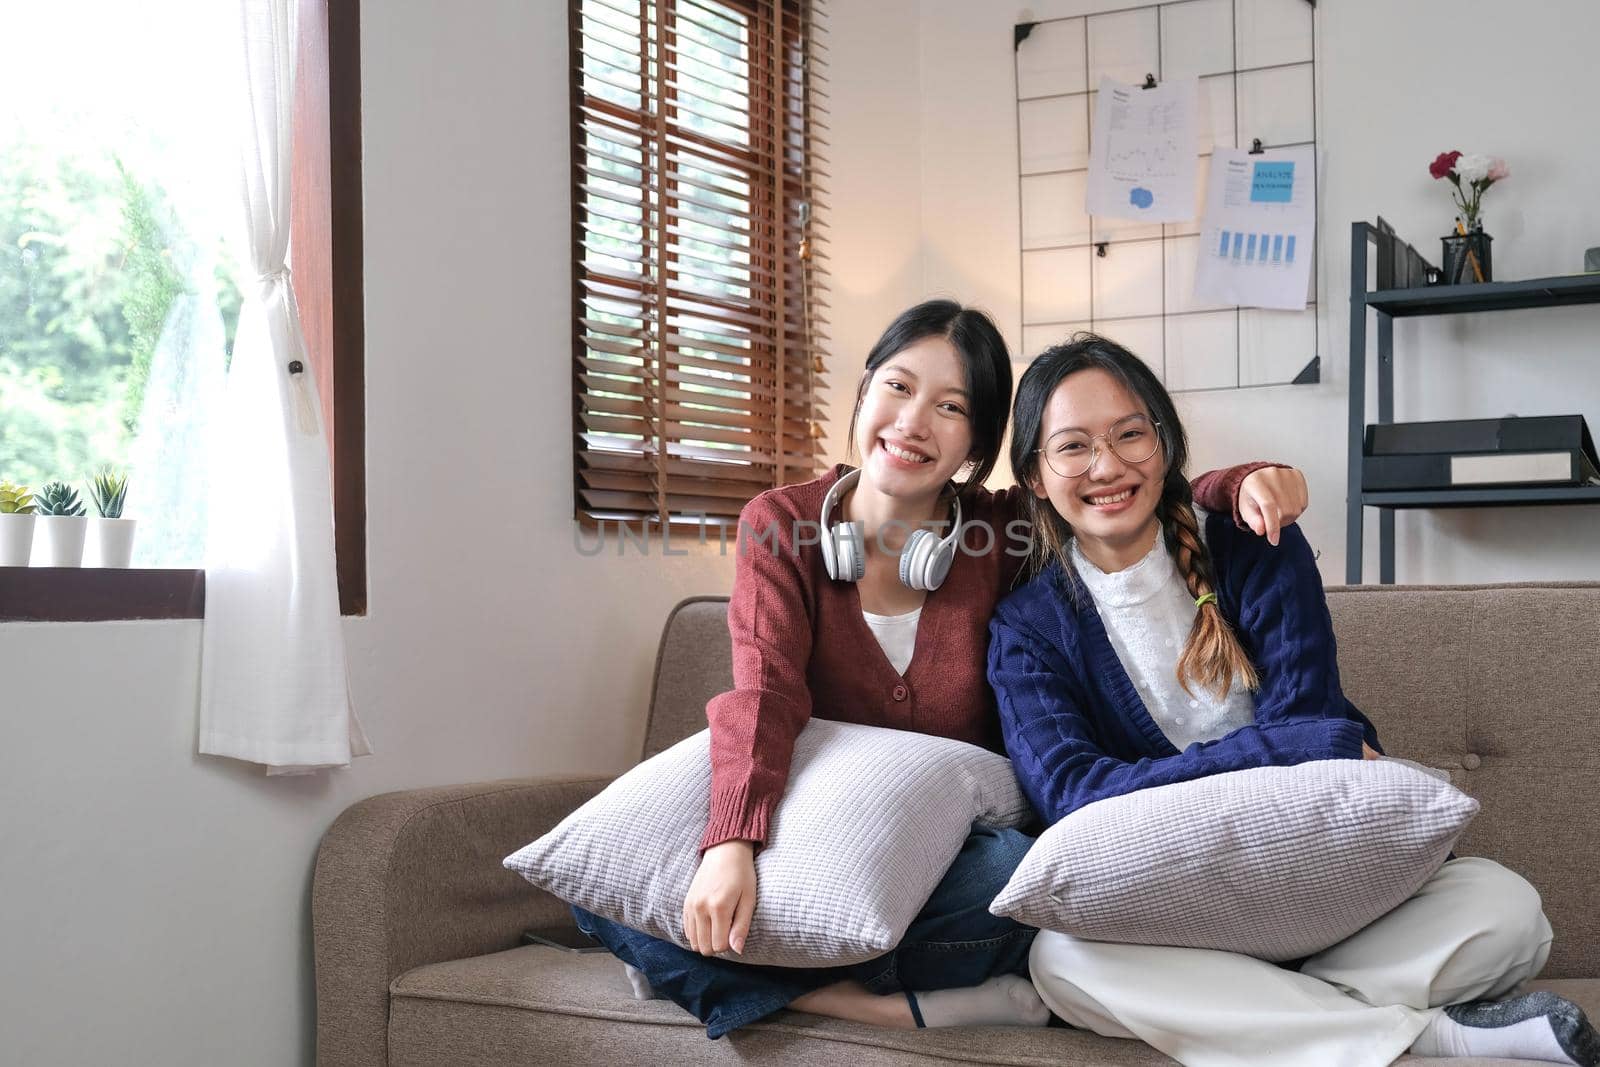 Asian beautiful lesbian women couple hugging girlfriend in living room. Attractive two female gay friend sitting on sofa in living room, feel happy and enjoy spending time together on holiday in house.